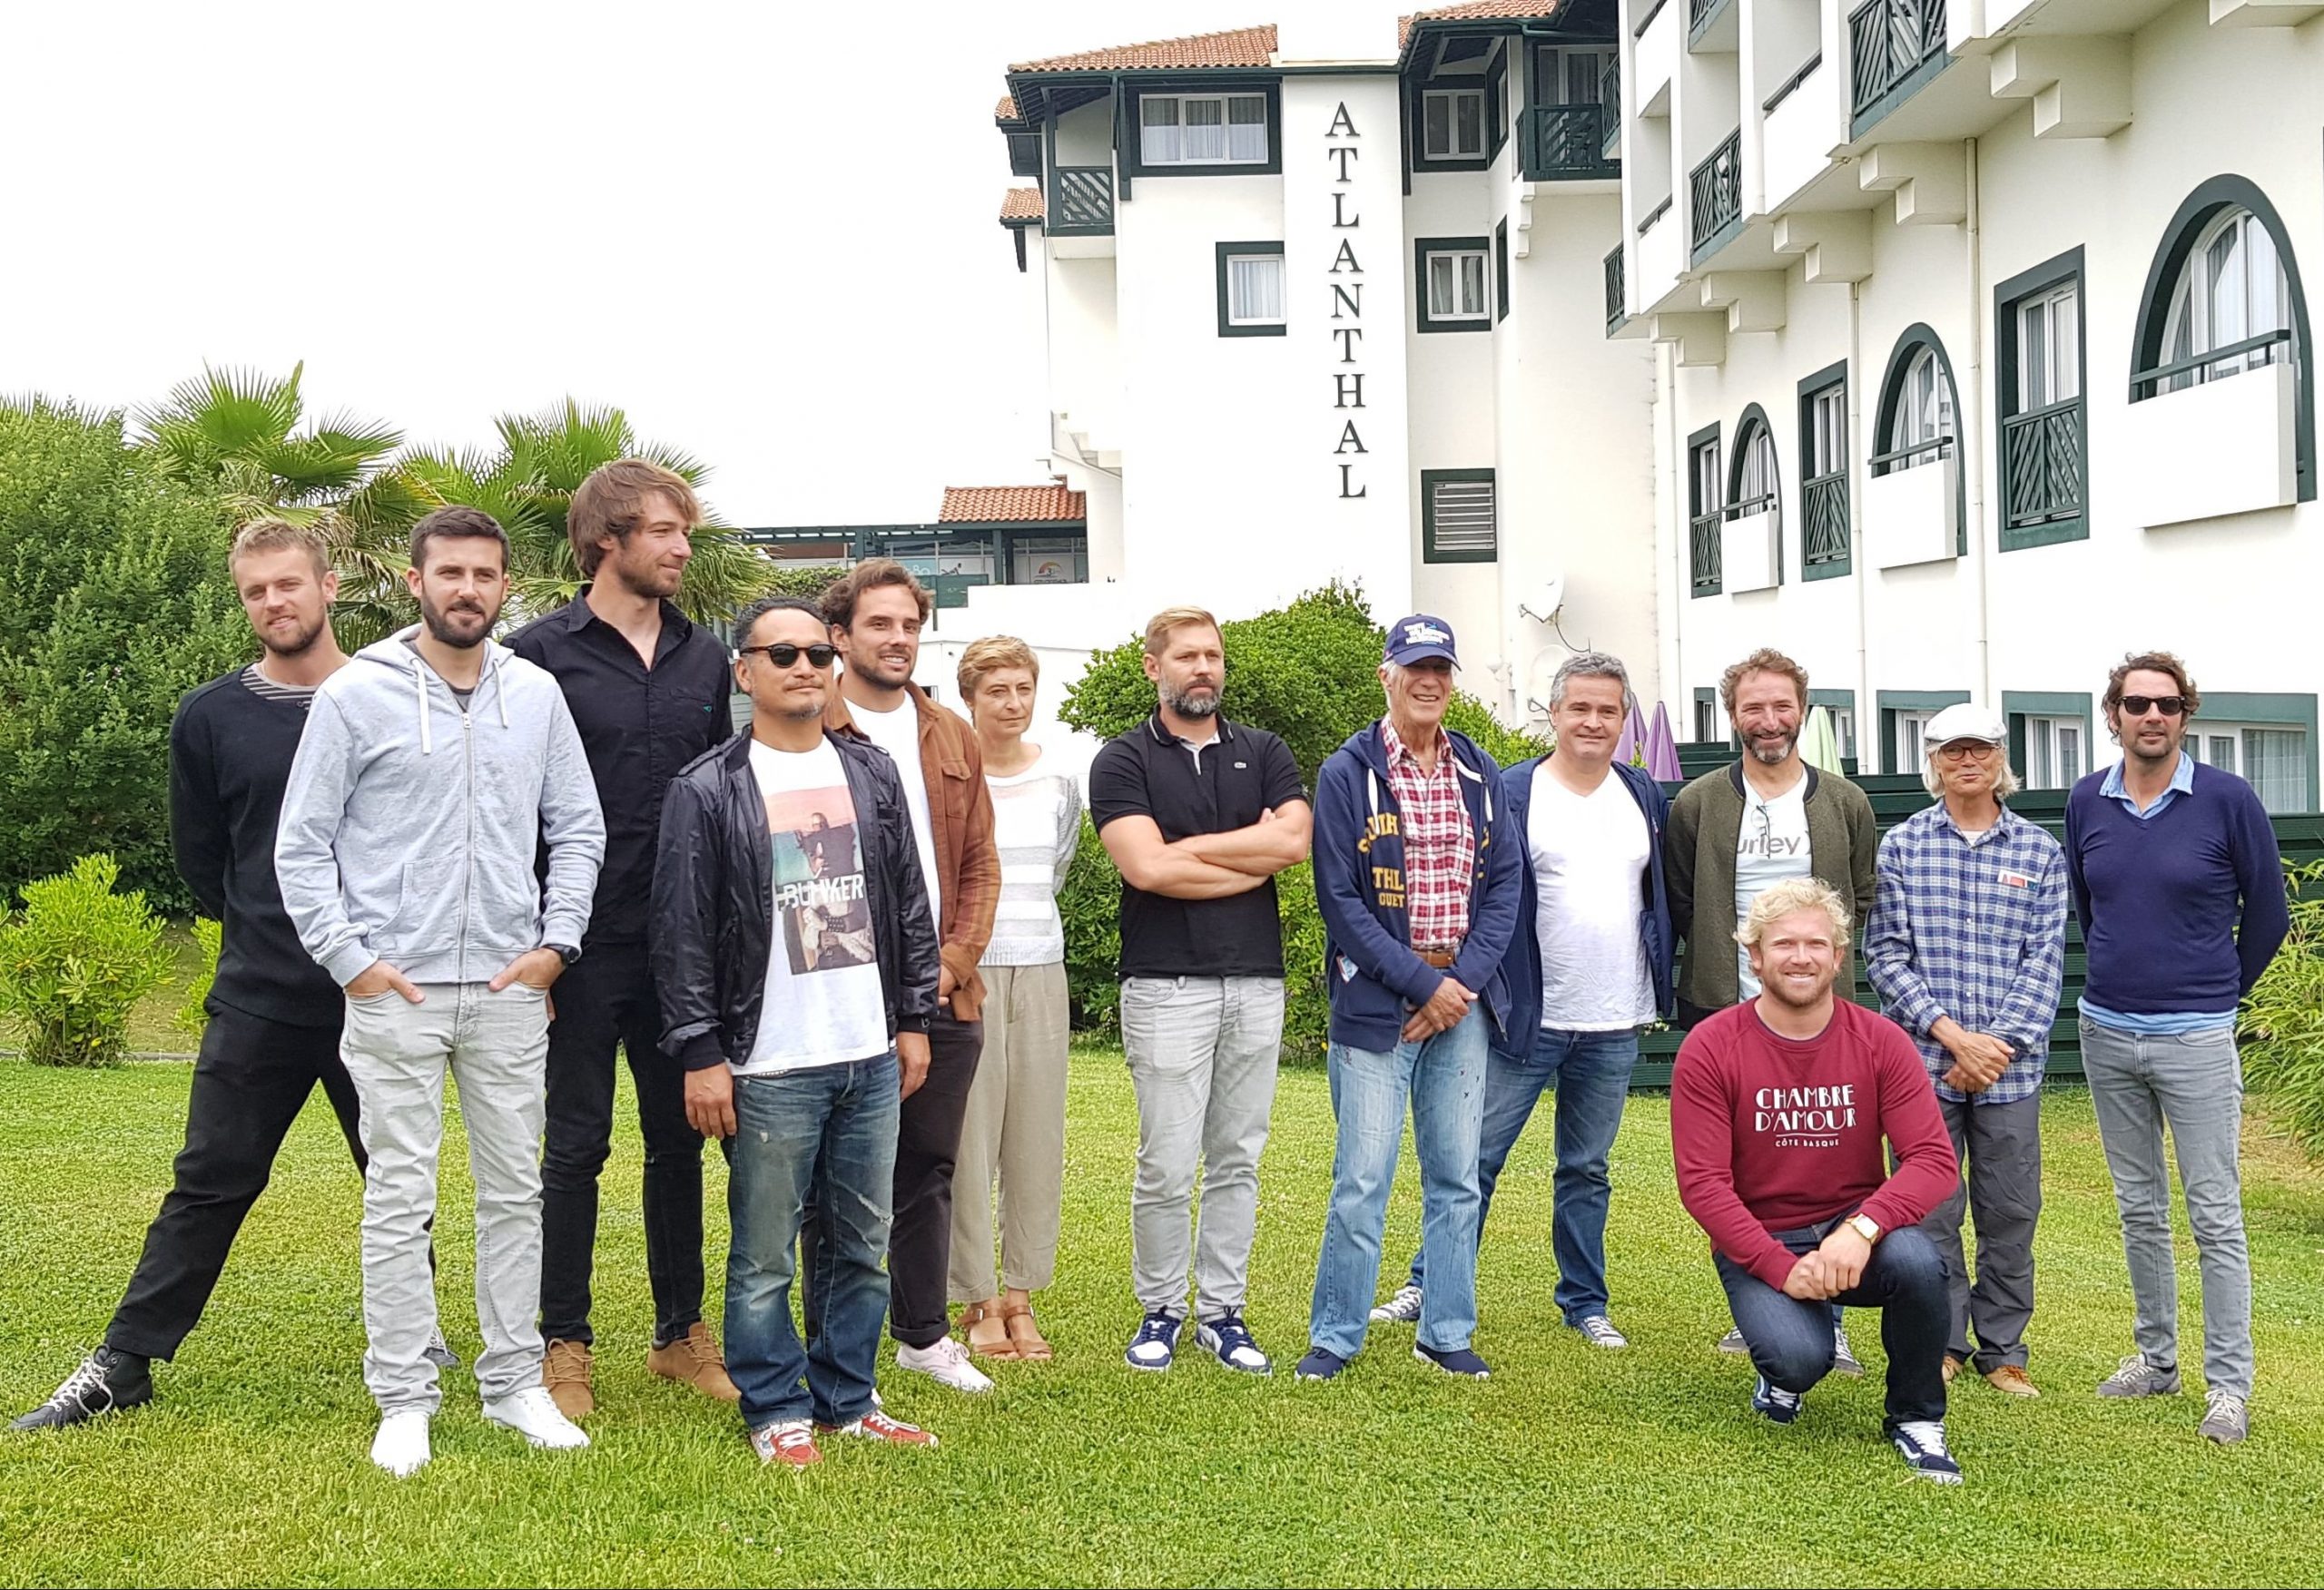 Directors and members of the Jury of the 16th edition of the International Surf Film Festival Anglet, with Bruno Delaye, the Festival Organiser.